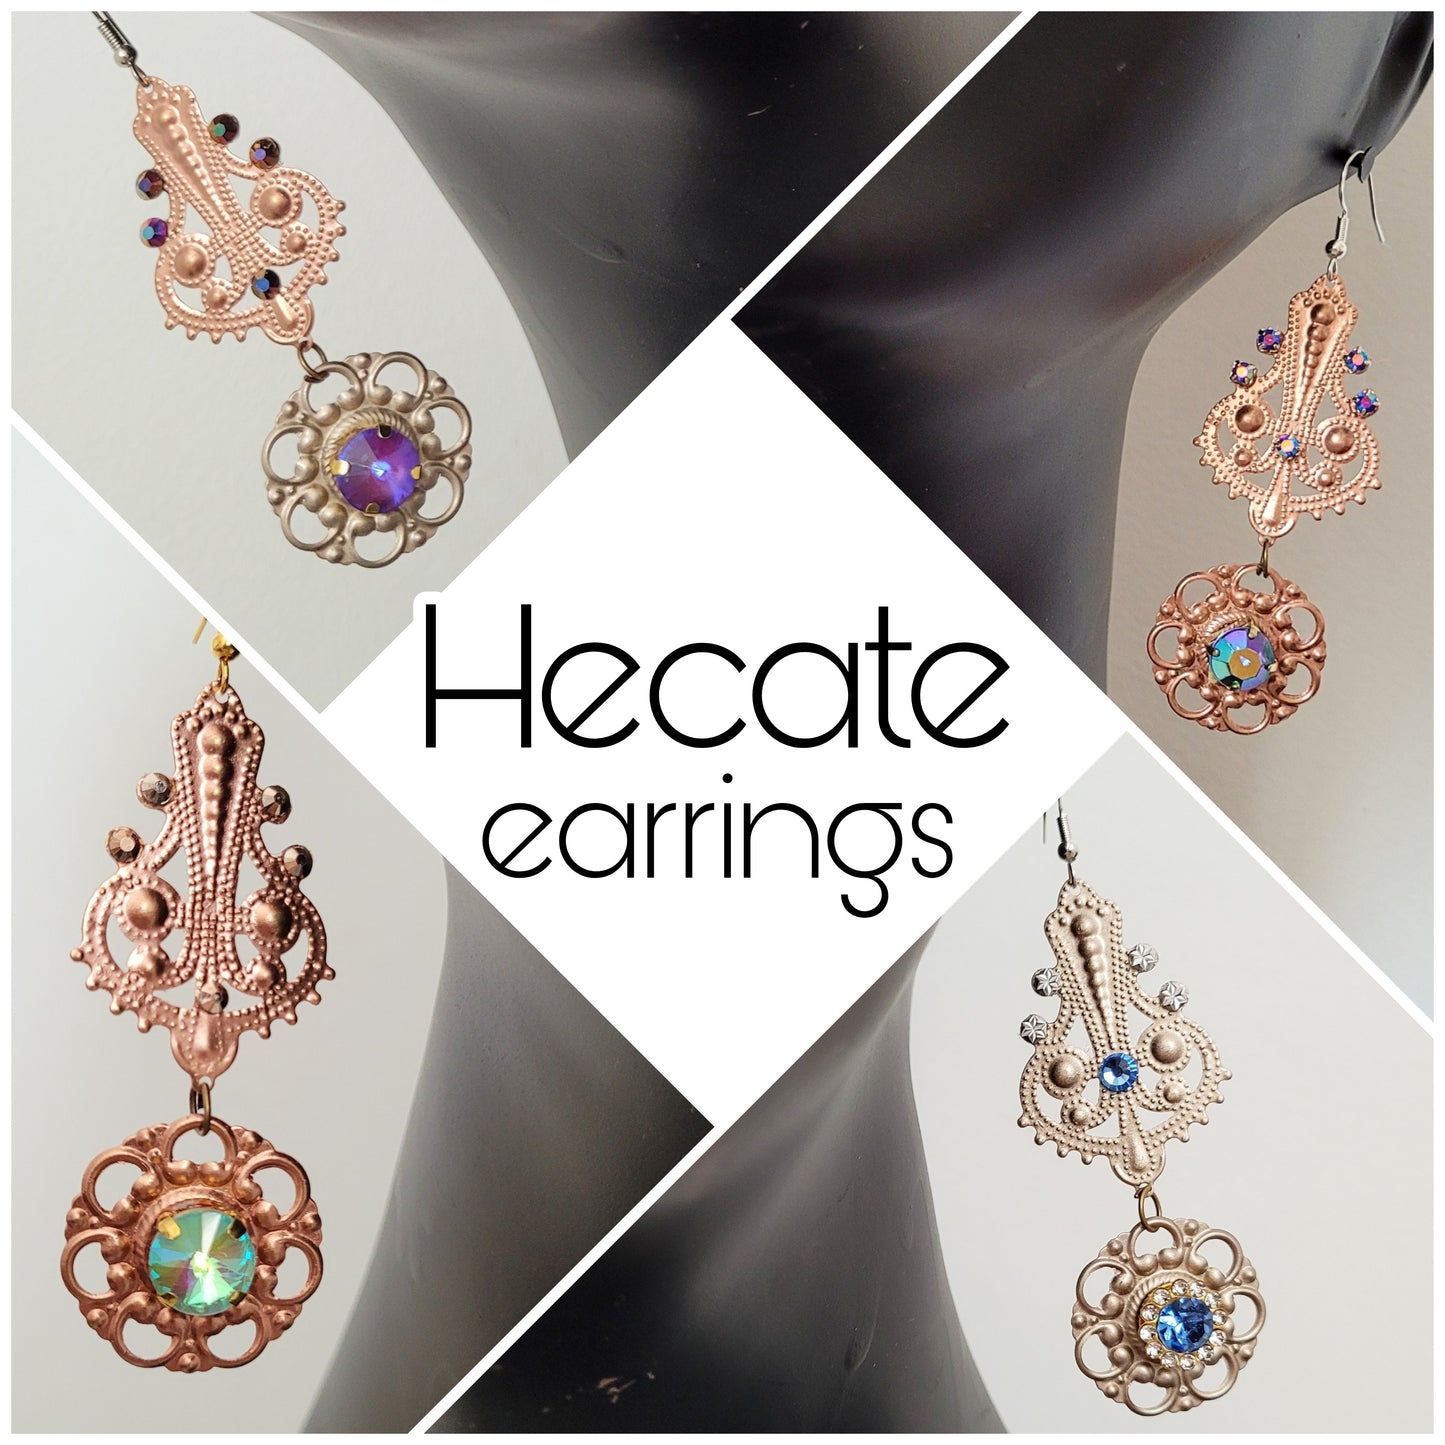 Deusa ex Machina collection: The Hecate earrings